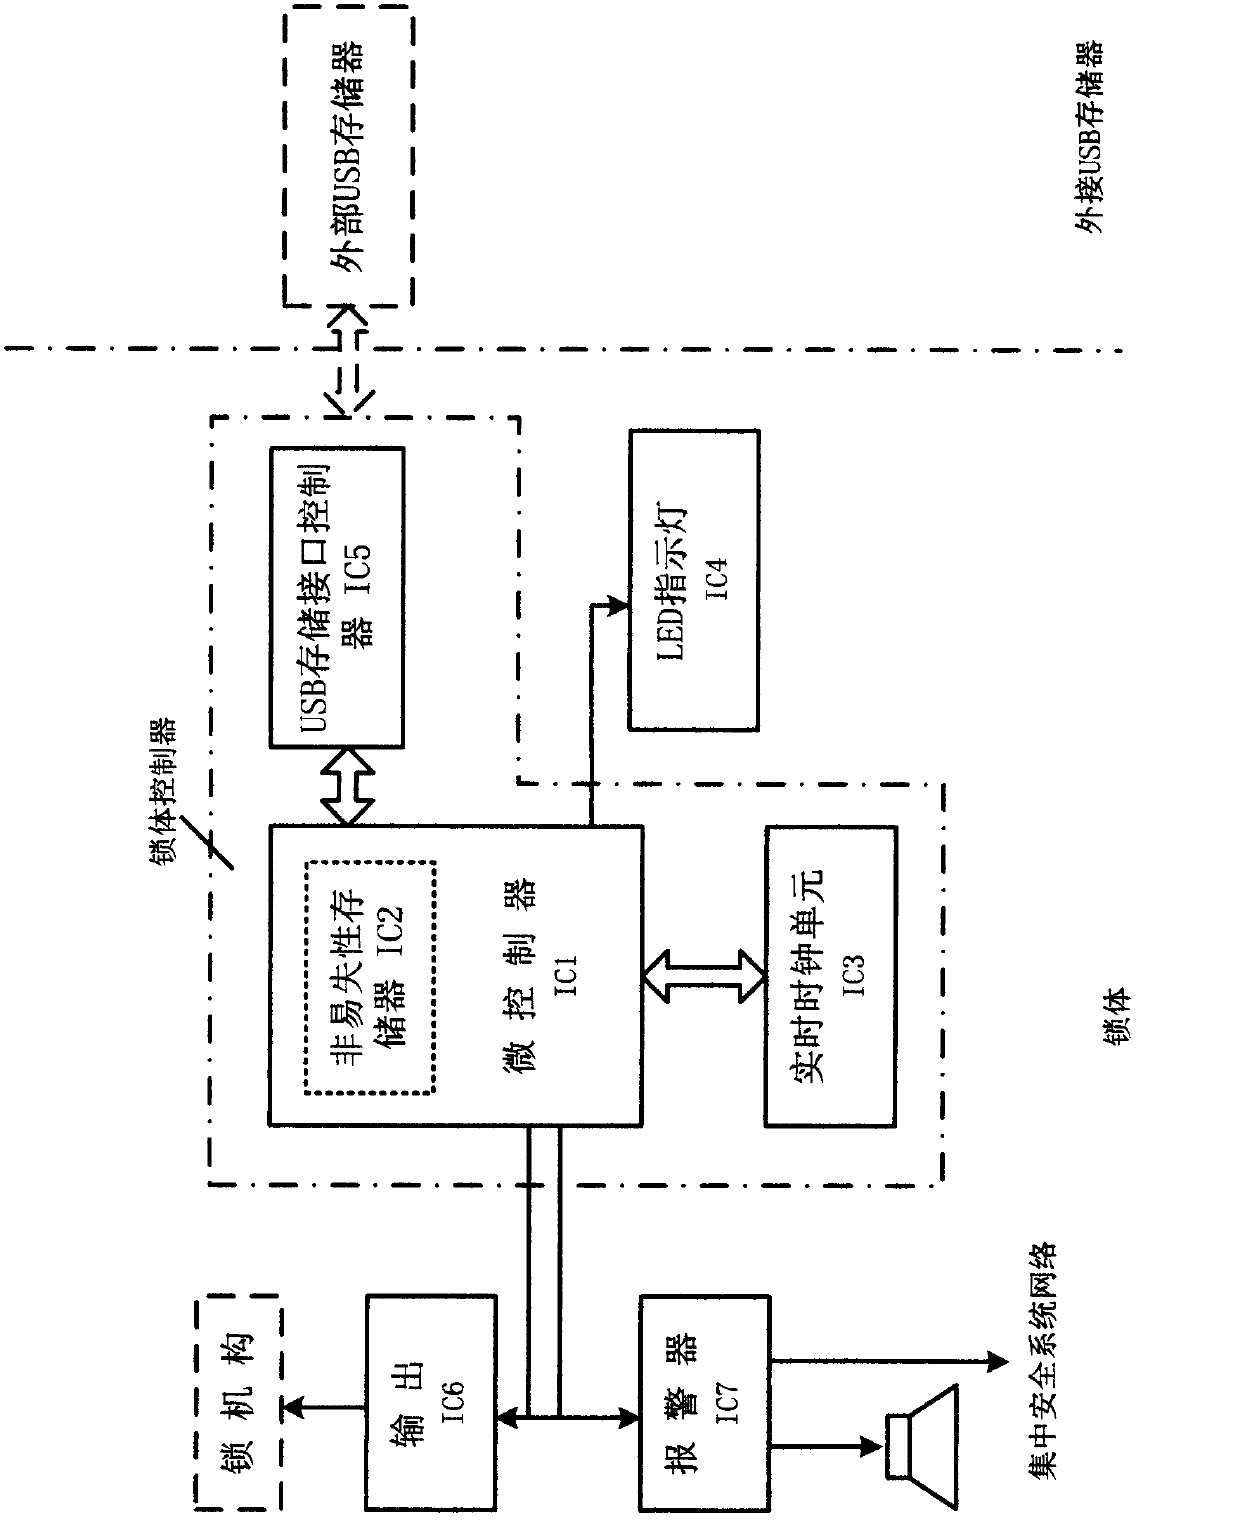 Coded lock system capable of unlocking in specific time period by using encrypted authorization data